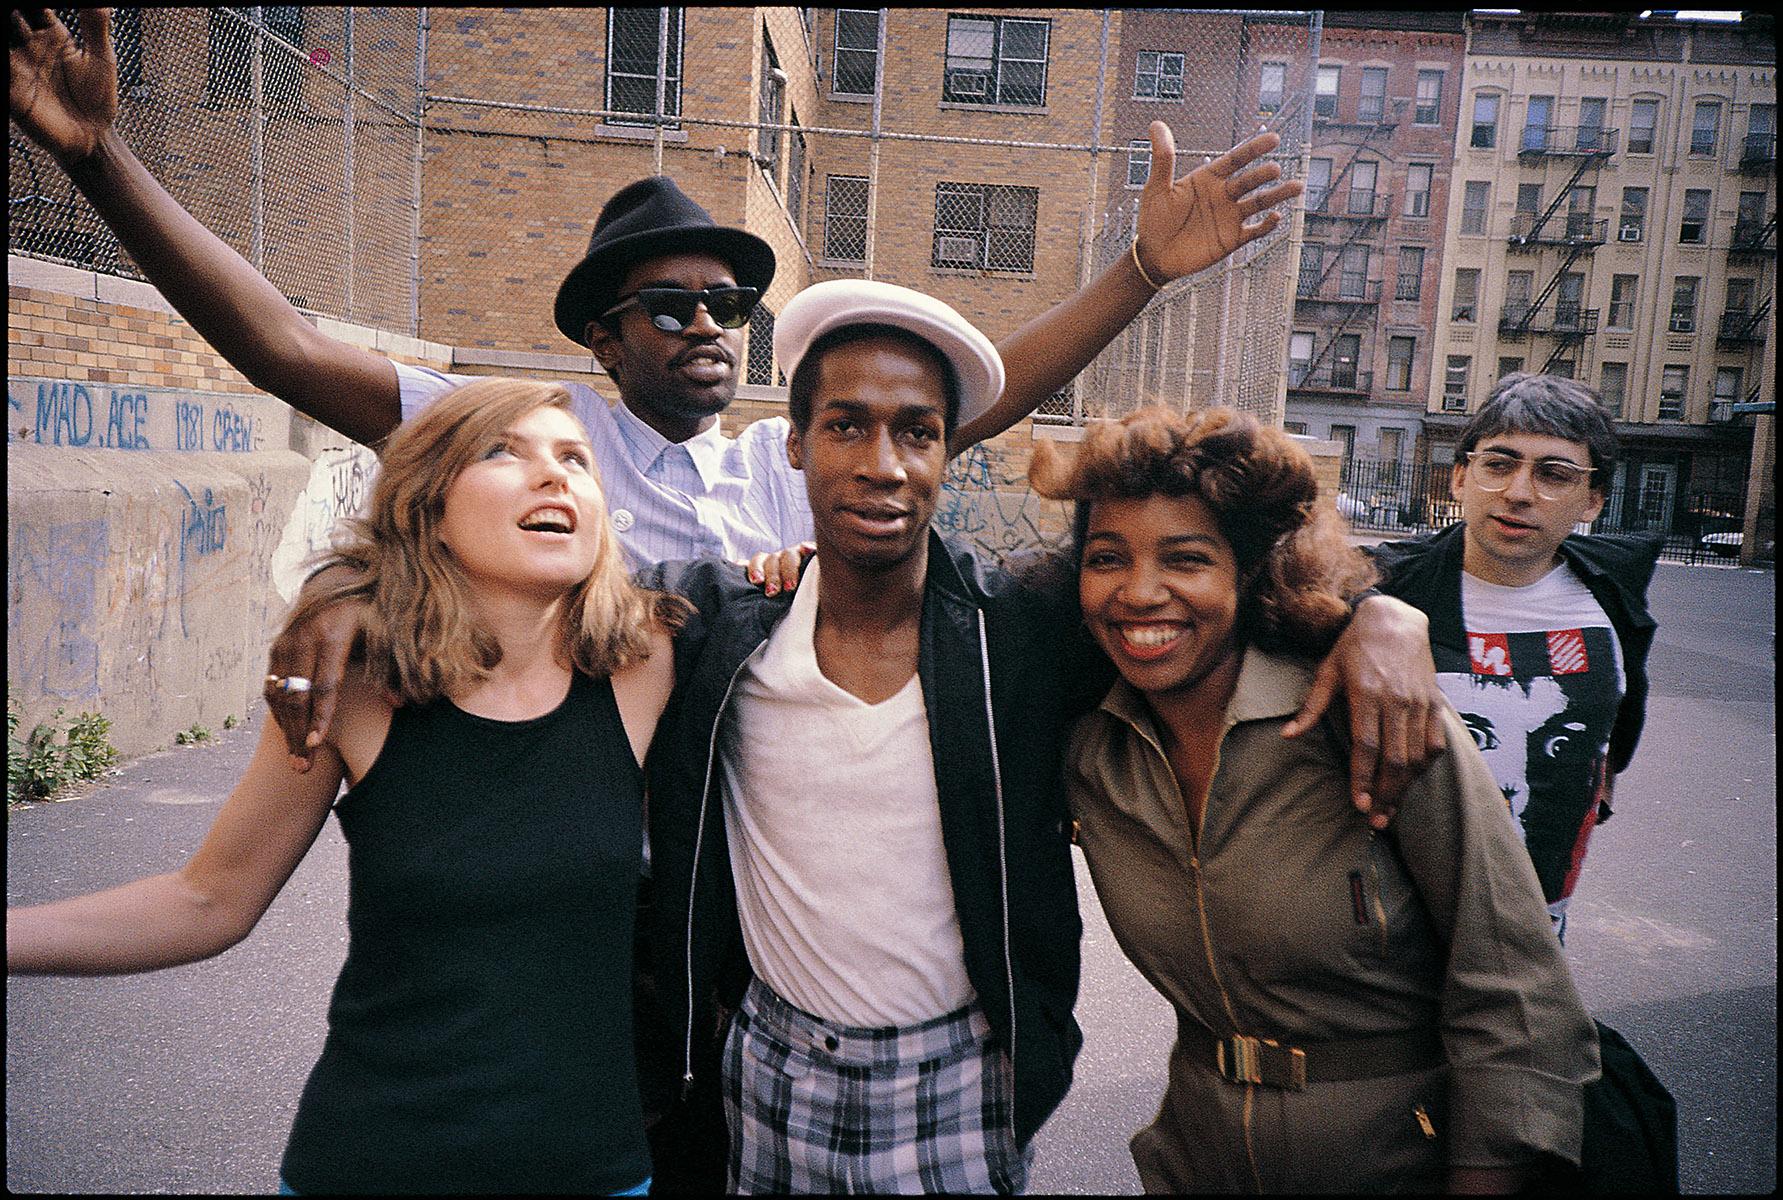 Grand Master Flash, Debbie Harry, Fab 5 Freddy, Chris Stein, & Tracy Wormworth captured by Charlie Ahearn of Wild Style; New York, NY 1981:
A seminal late 1970s/early 1980s art/music scene photograph included as part of the exhibition: 'New York,